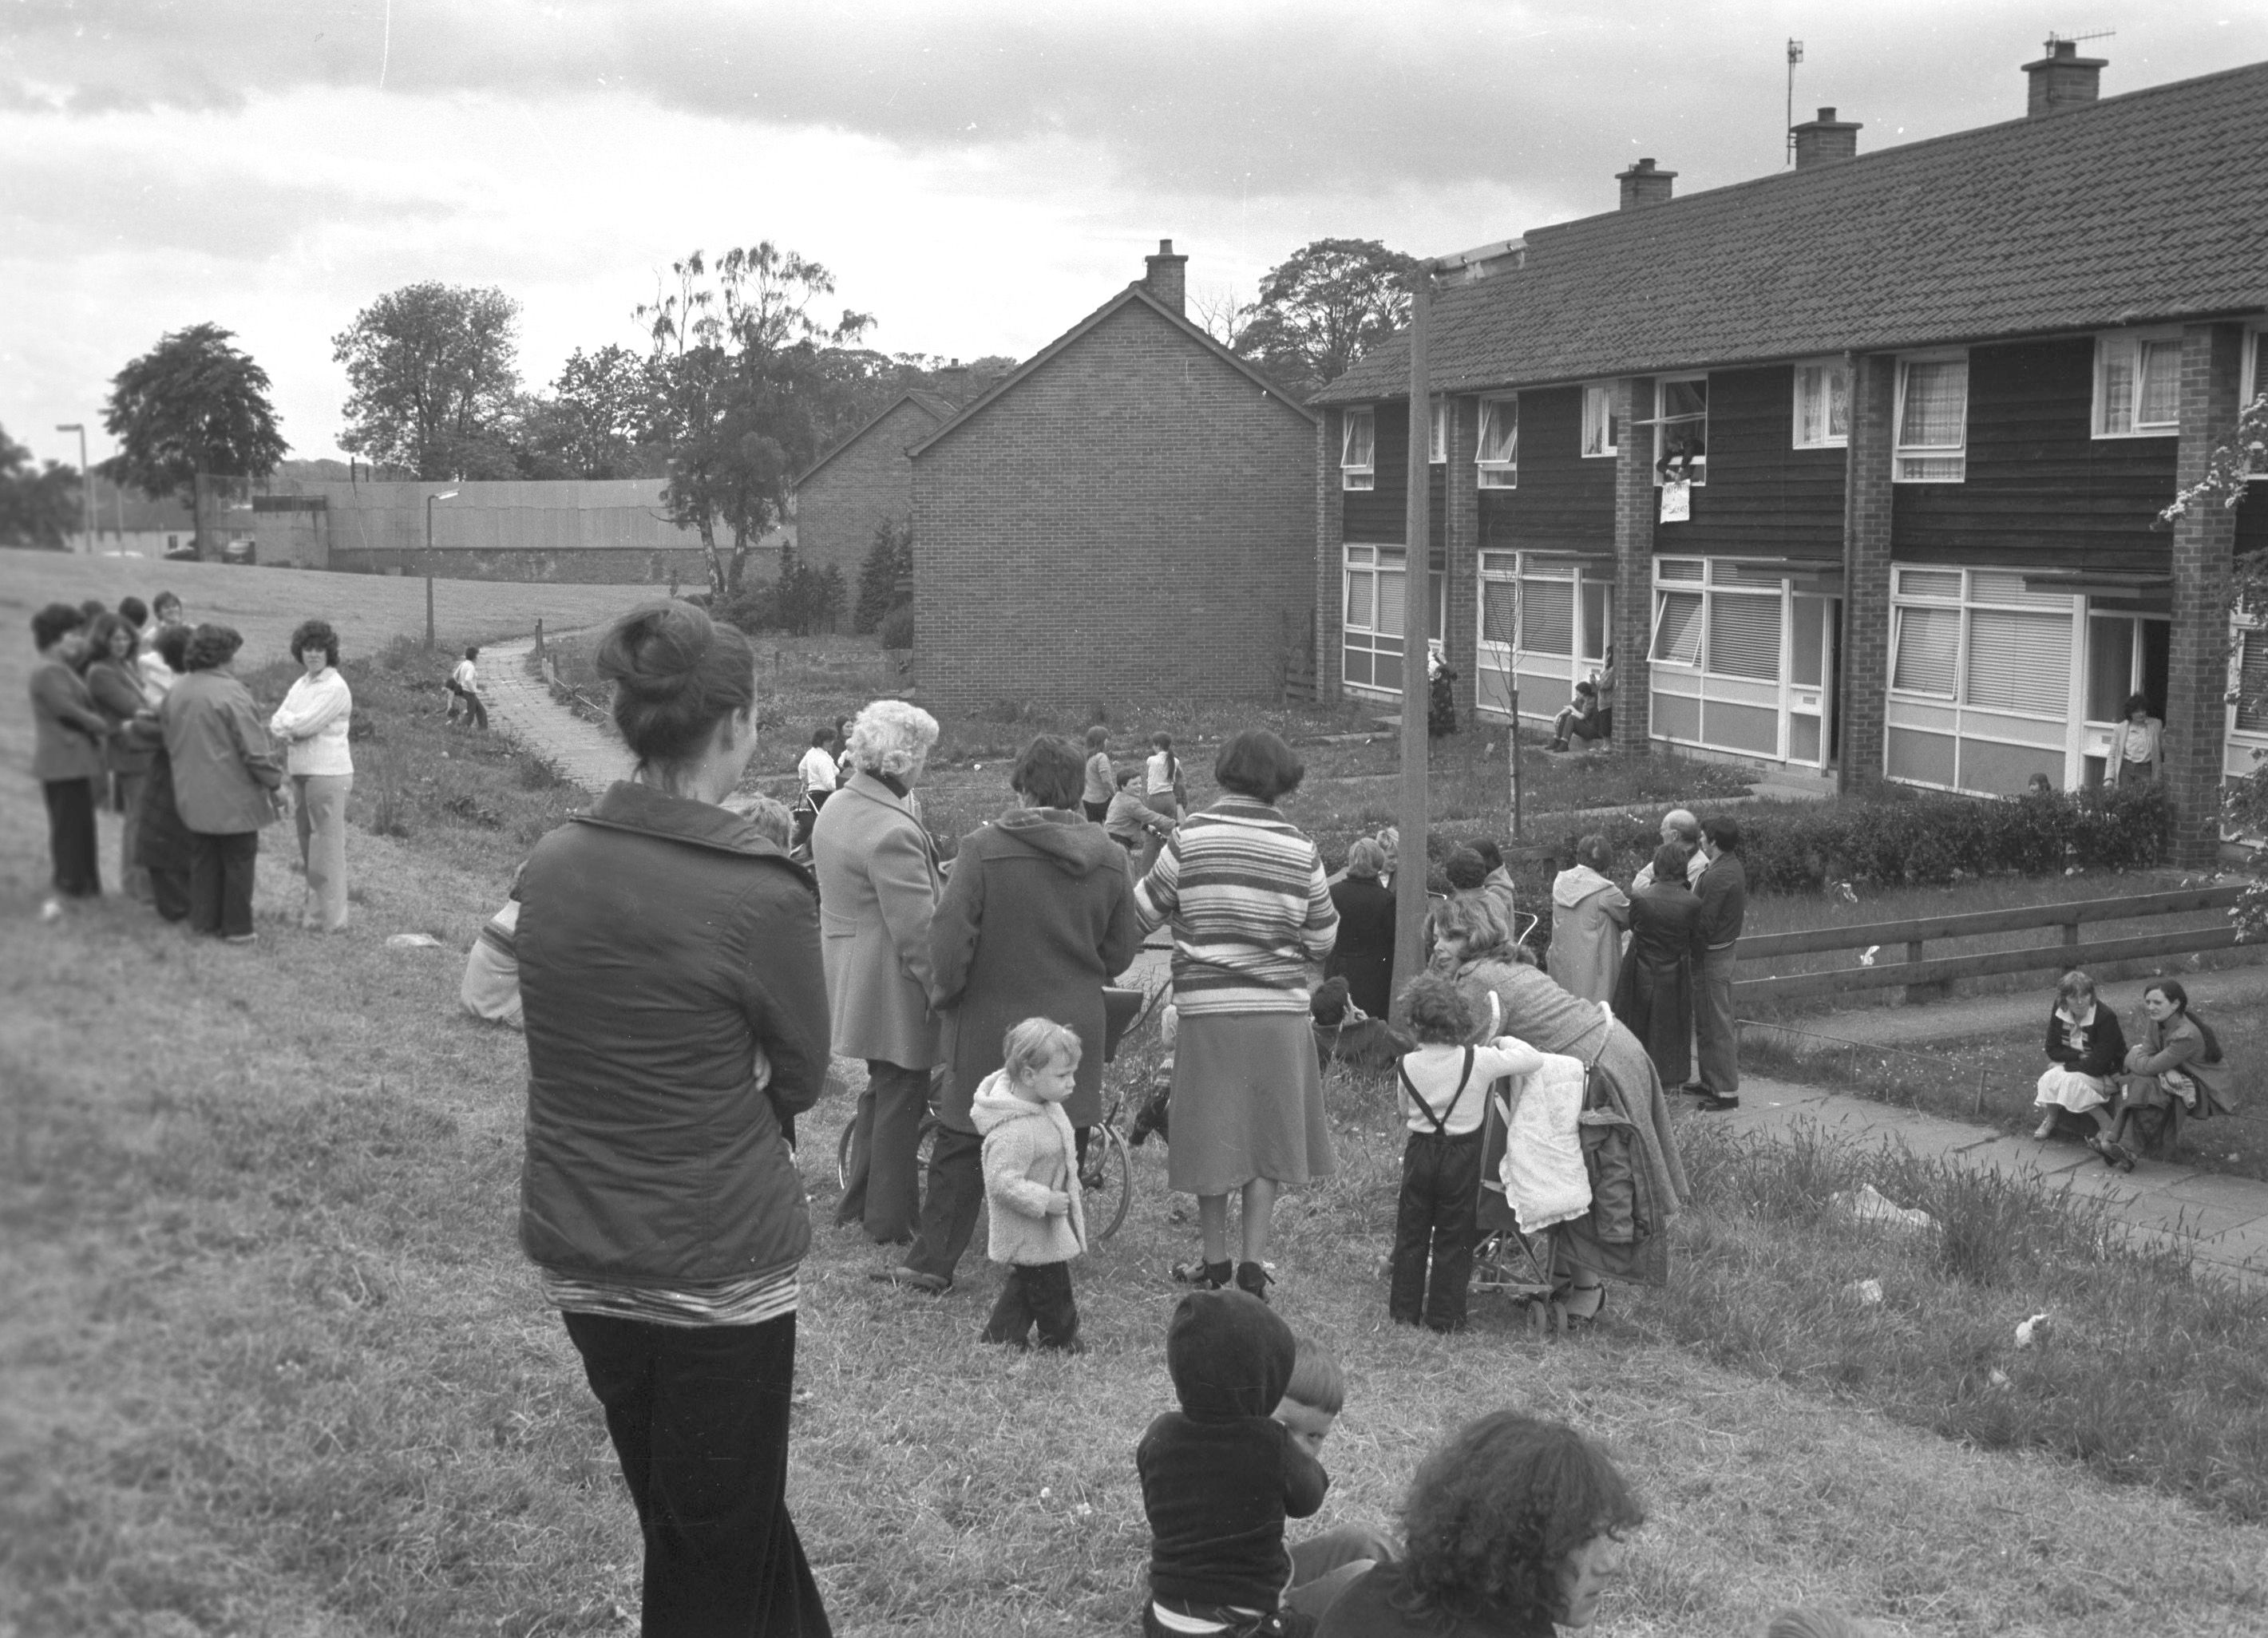 STANDING FIRM: Lenadoon residents resist an attempted eviction back in June 1980